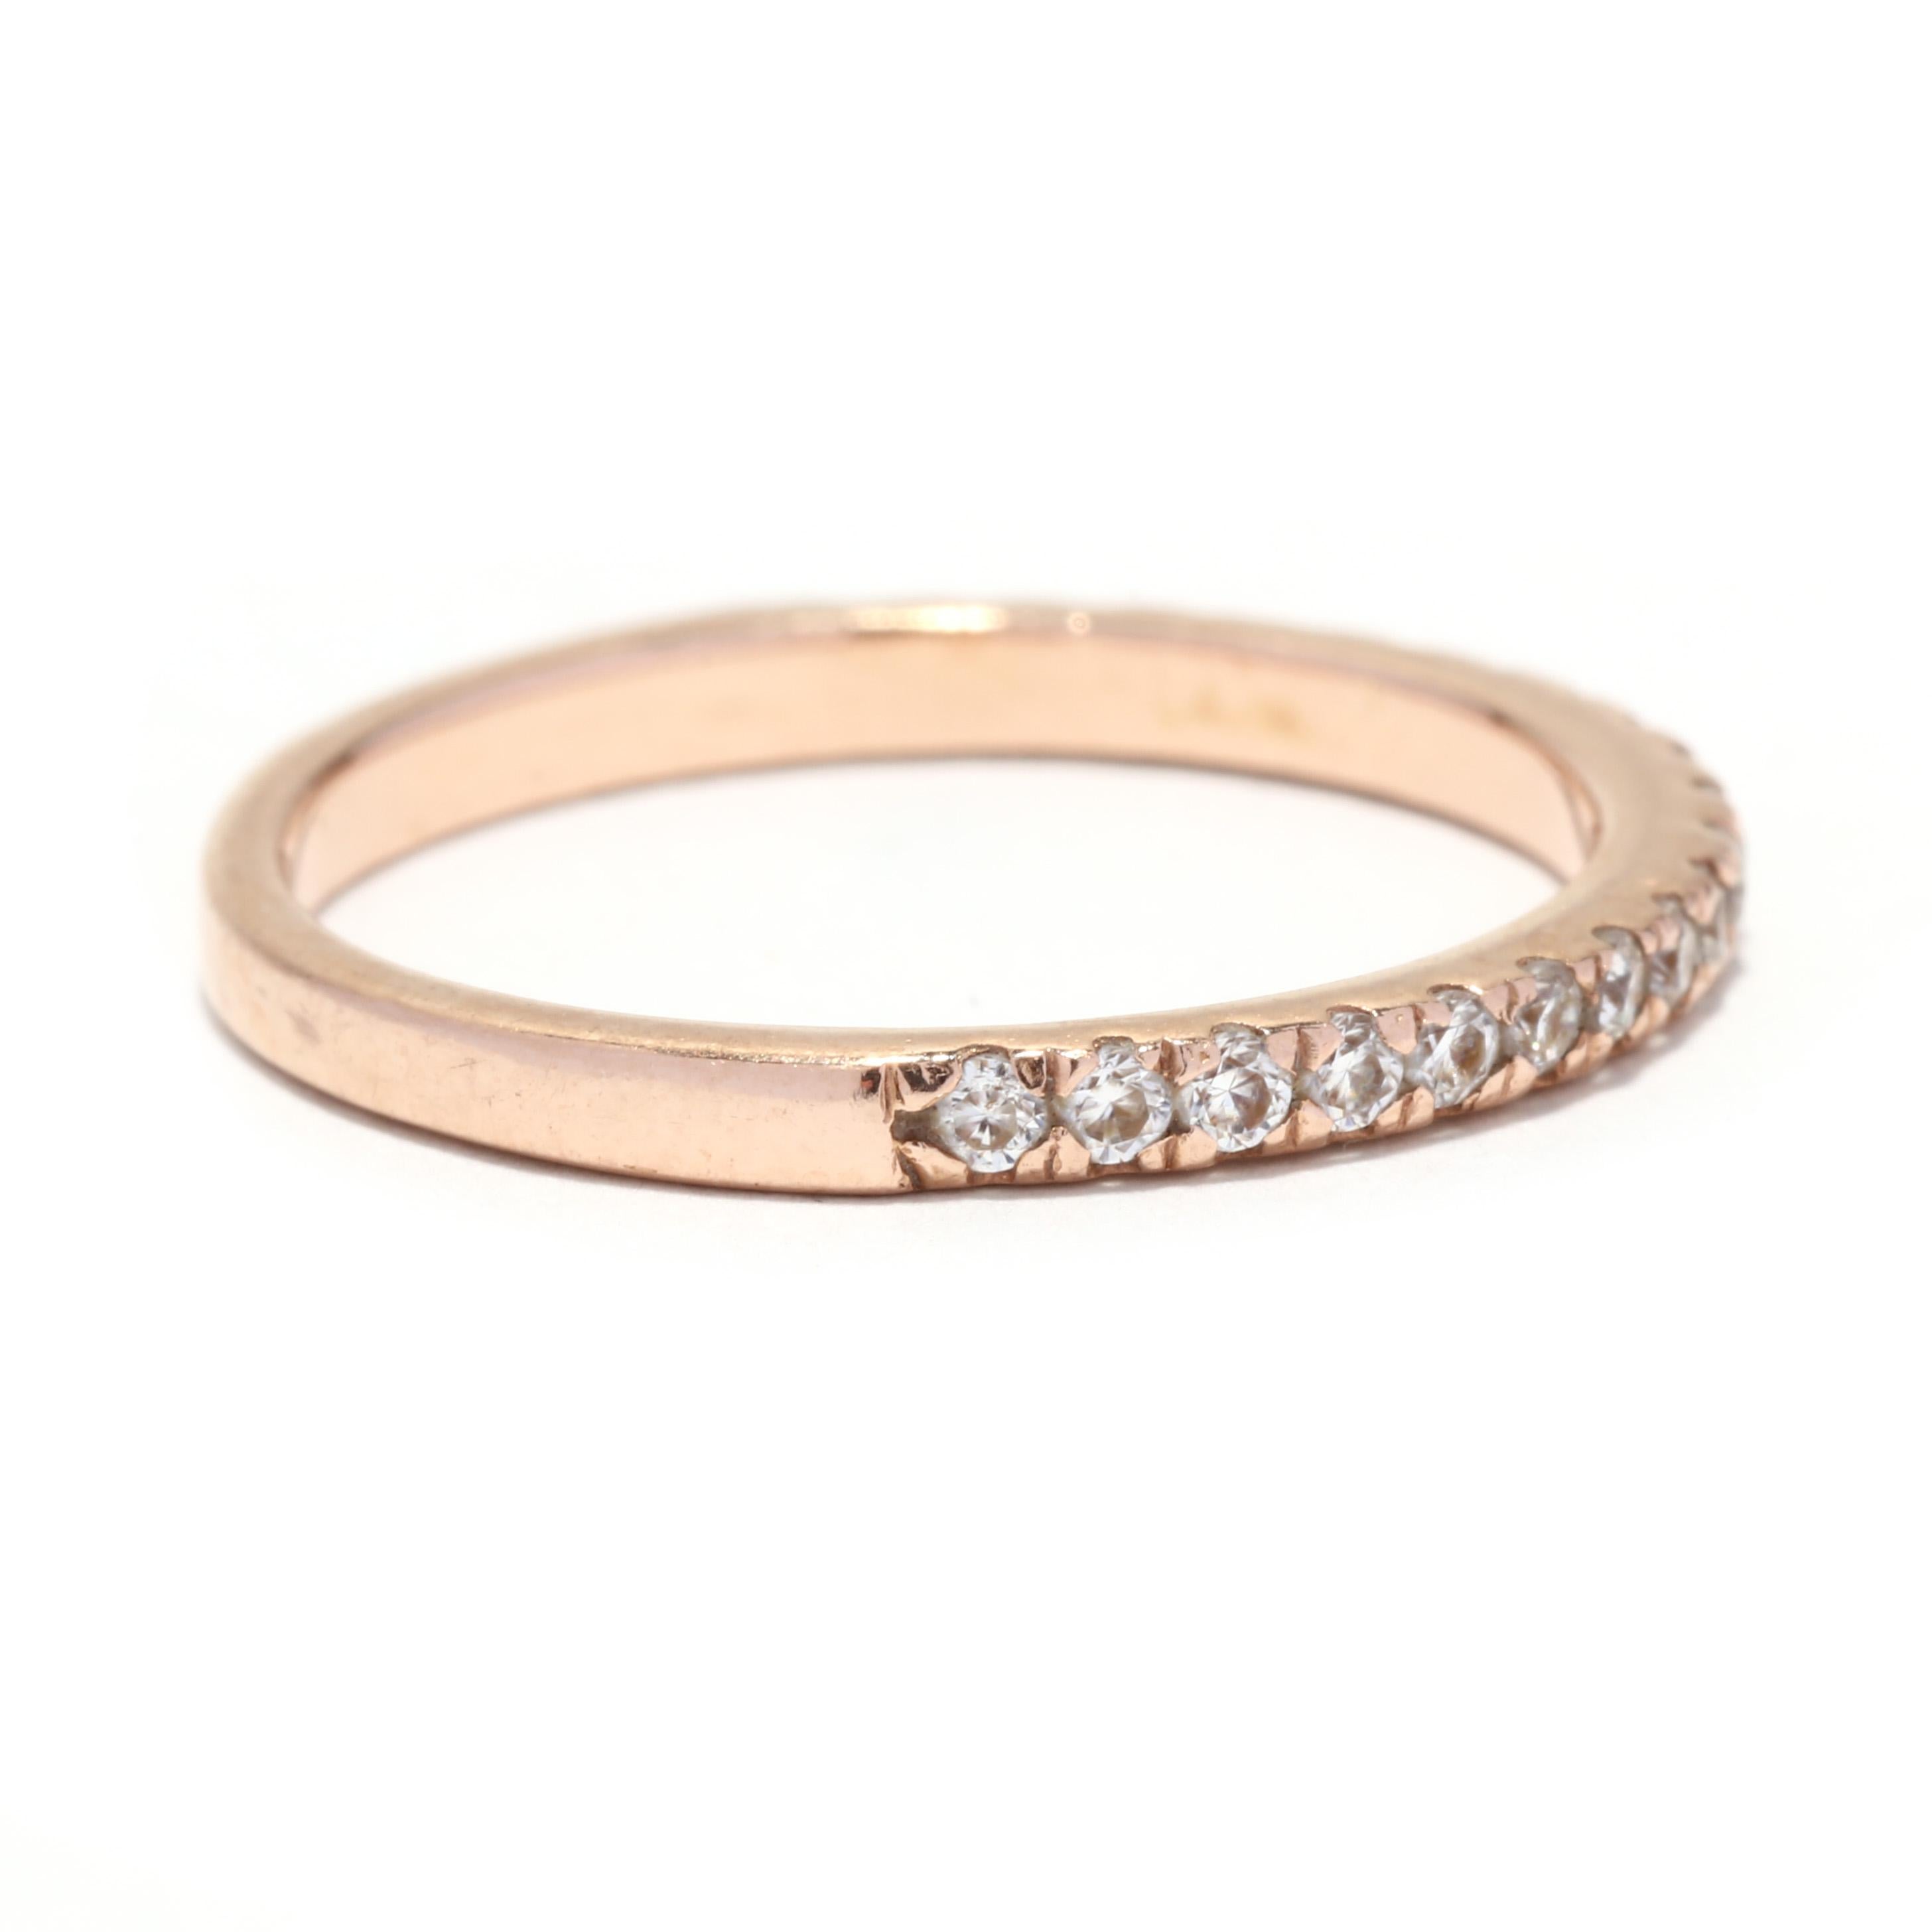 A 14 karat rose gold thin moissanite wedding band. This stackable band features pavé set, round brilliant cut moissanites weighing approximately .30 total carats and with a thin band.

Stones:
- moissanites, 21 stones
- round brilliant cut
- 1.5